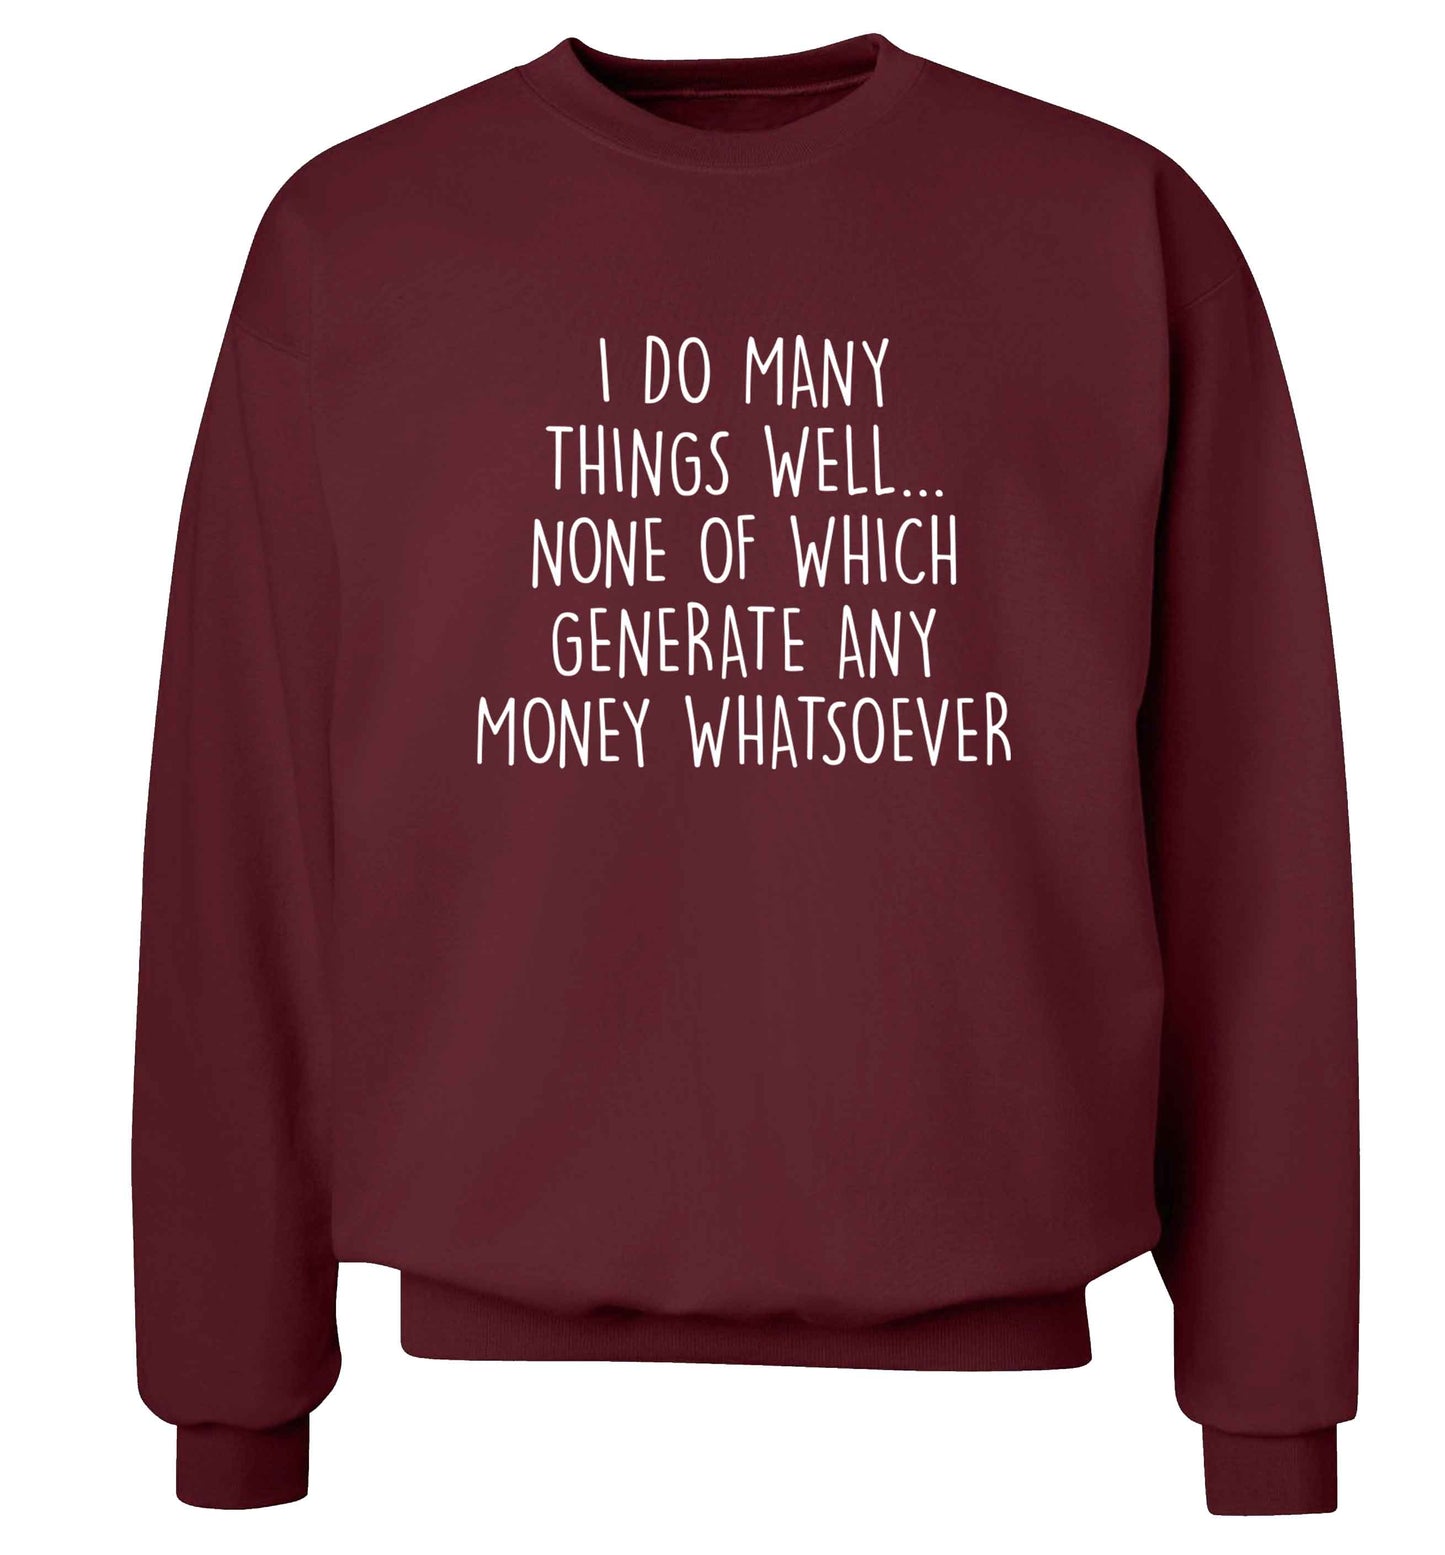 I do many things well none of which generate income Adult's unisex maroon Sweater 2XL